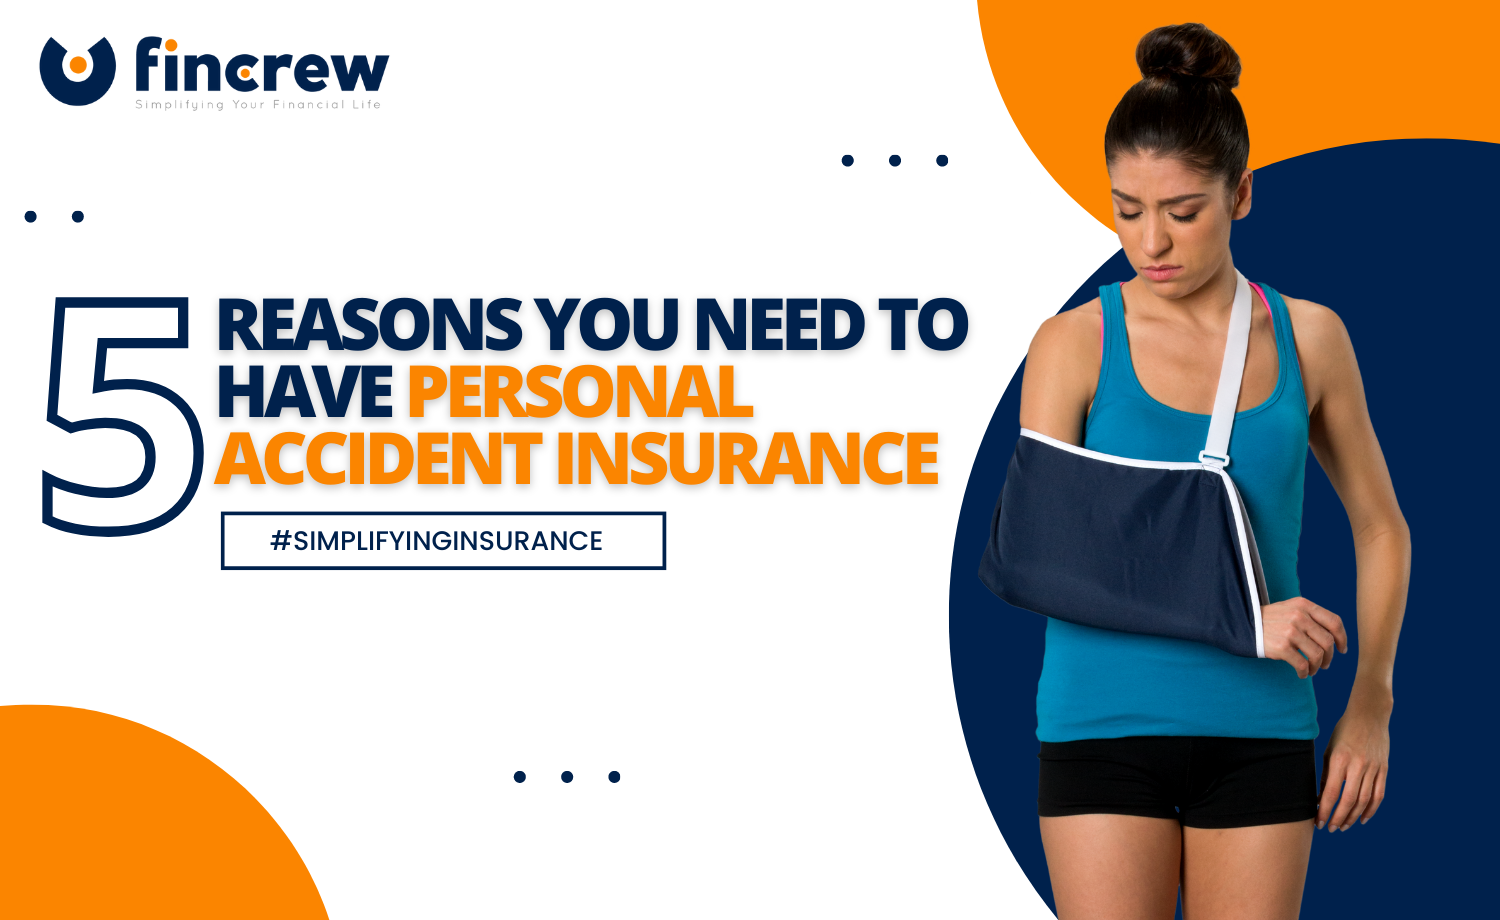 Reasons You Need To Have Personal Accident Insurance Blog Featured Image